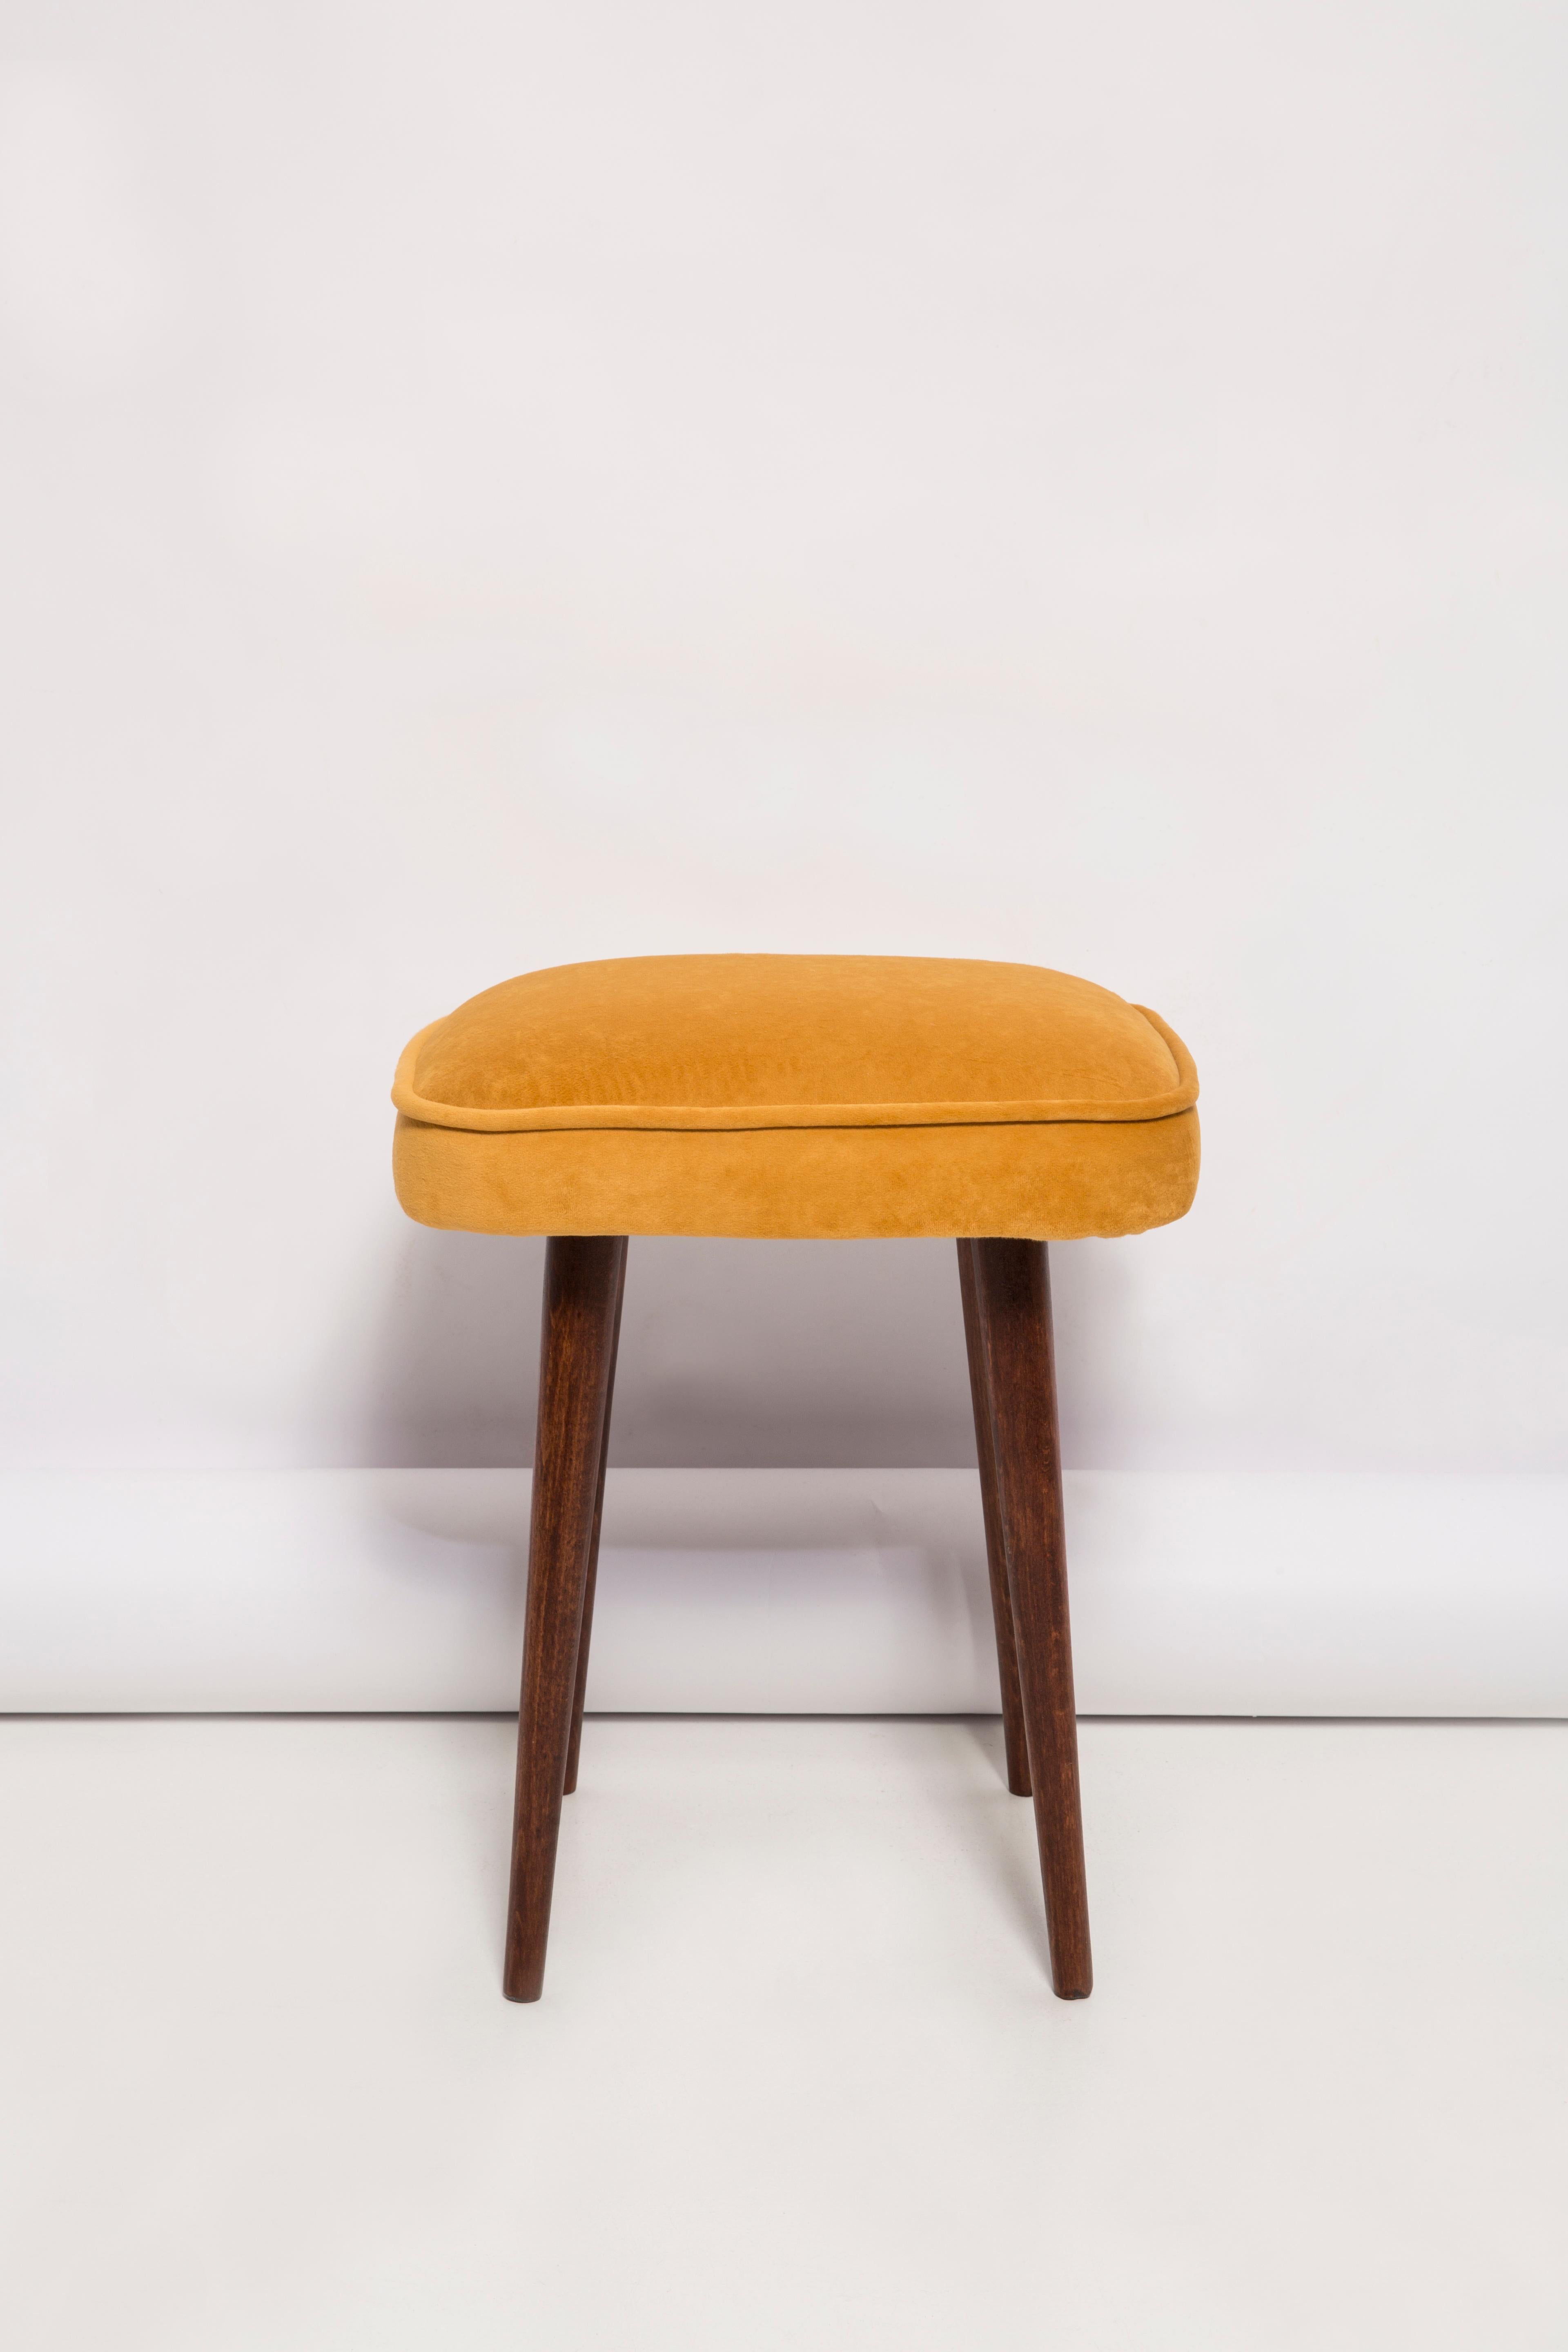 Stools from the turn of the 1960s and 1970s. Beautiful mustard velor upholstery. The stools consists of an upholstered part, a seat and wooden legs narrowing downwards, characteristic of the 1960s style. We can prepare this pair also in another